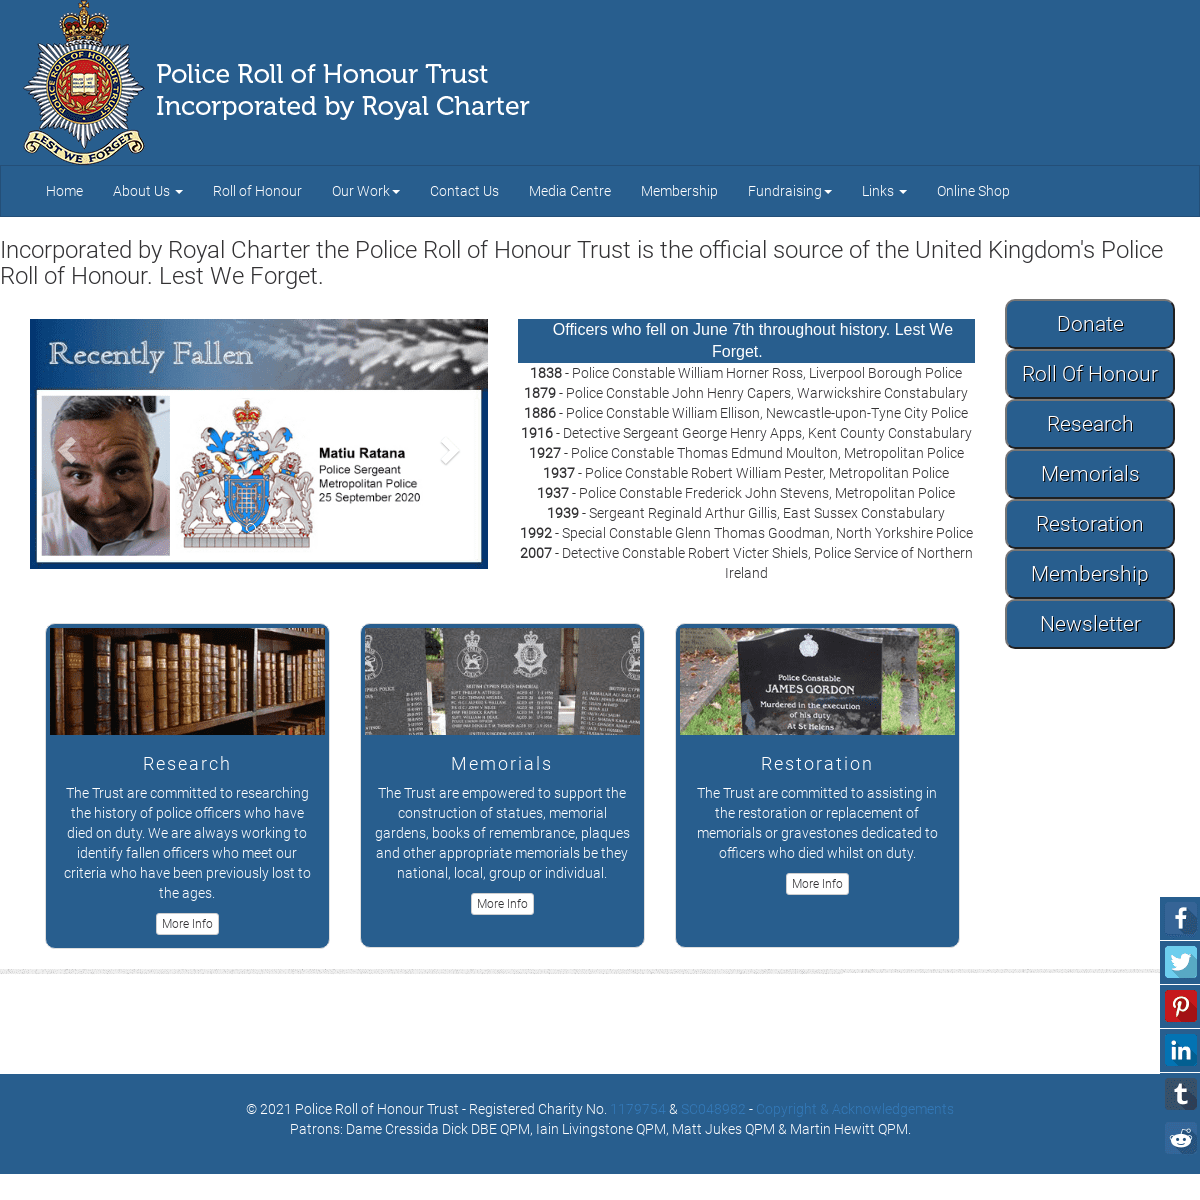 A complete backup of https://policememorial.org.uk